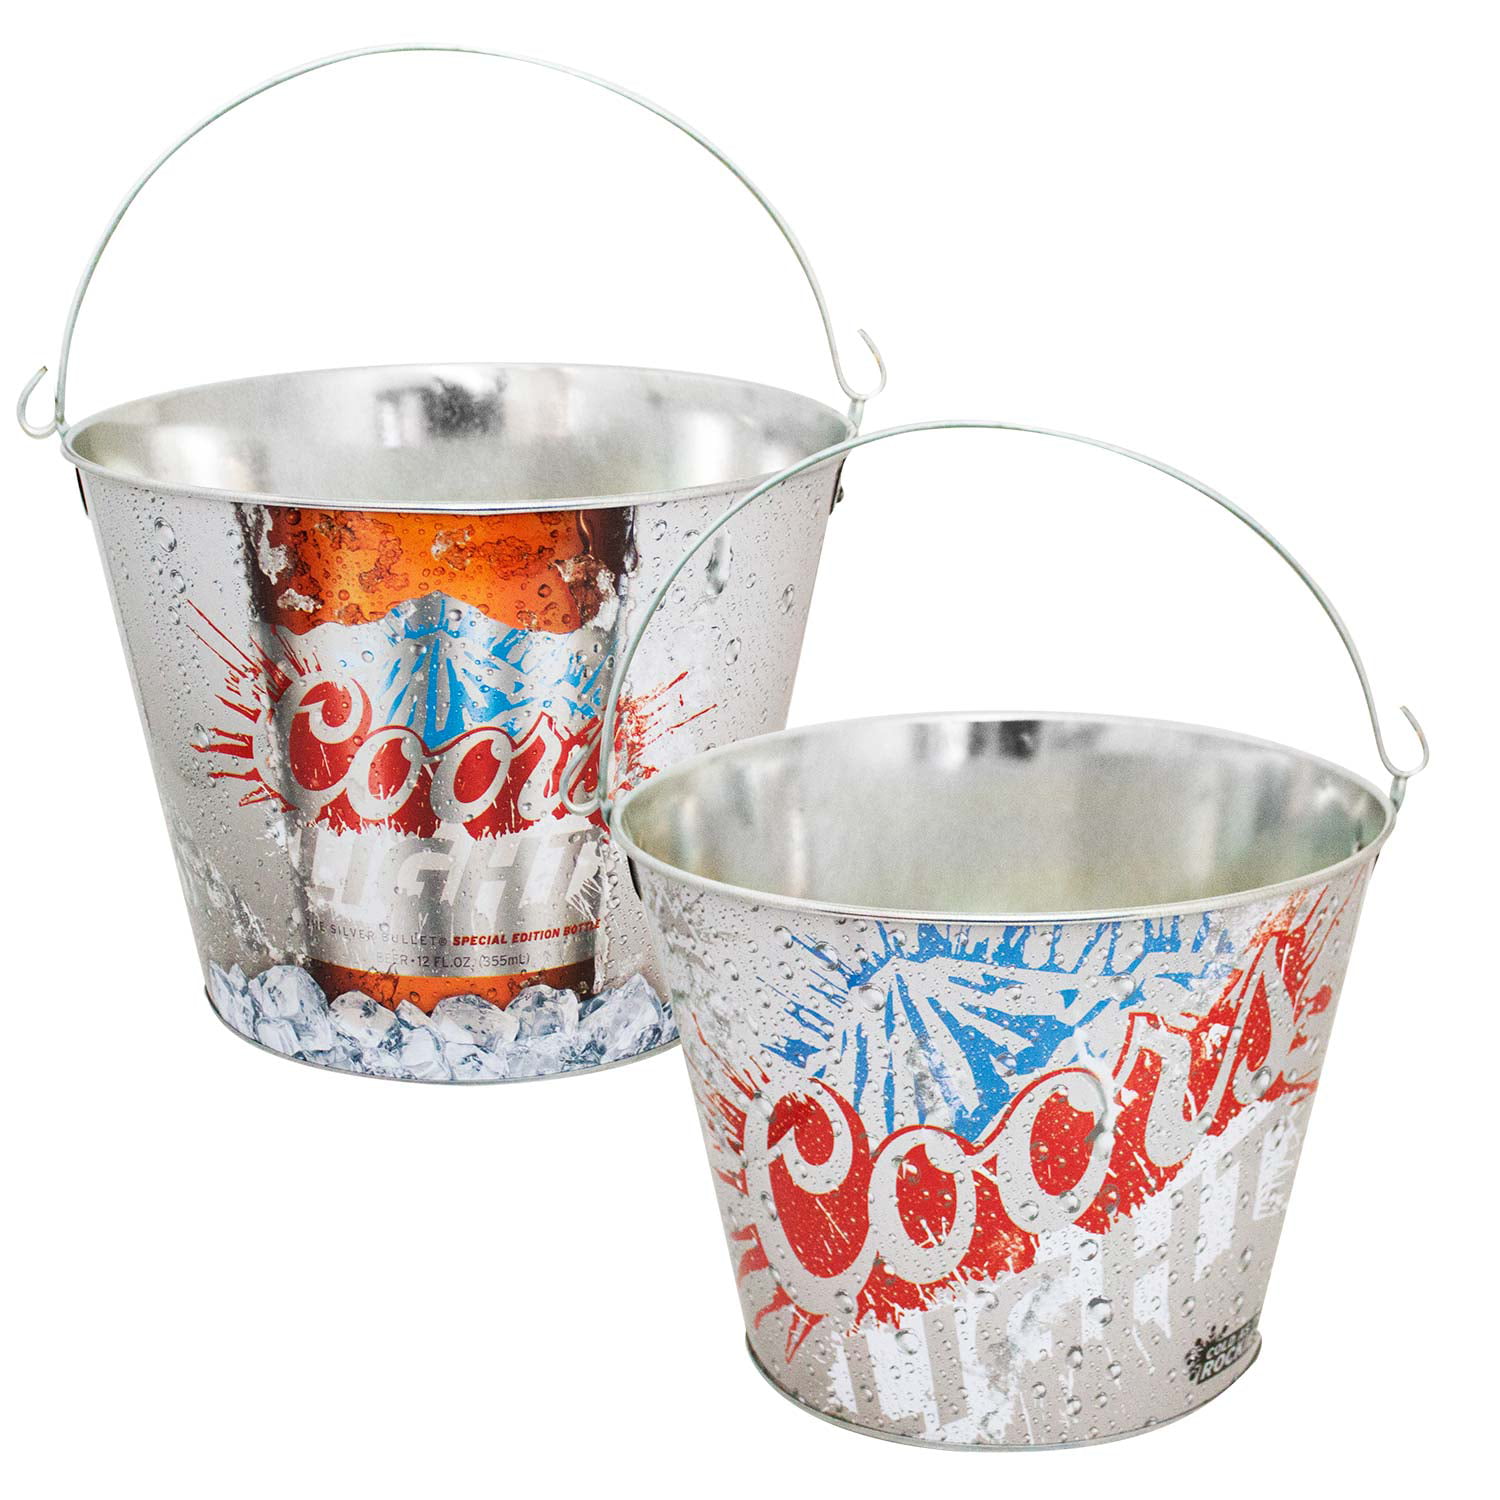 Coors Light Ice Bucket Tin Pail Beer Holder Man Cave New 